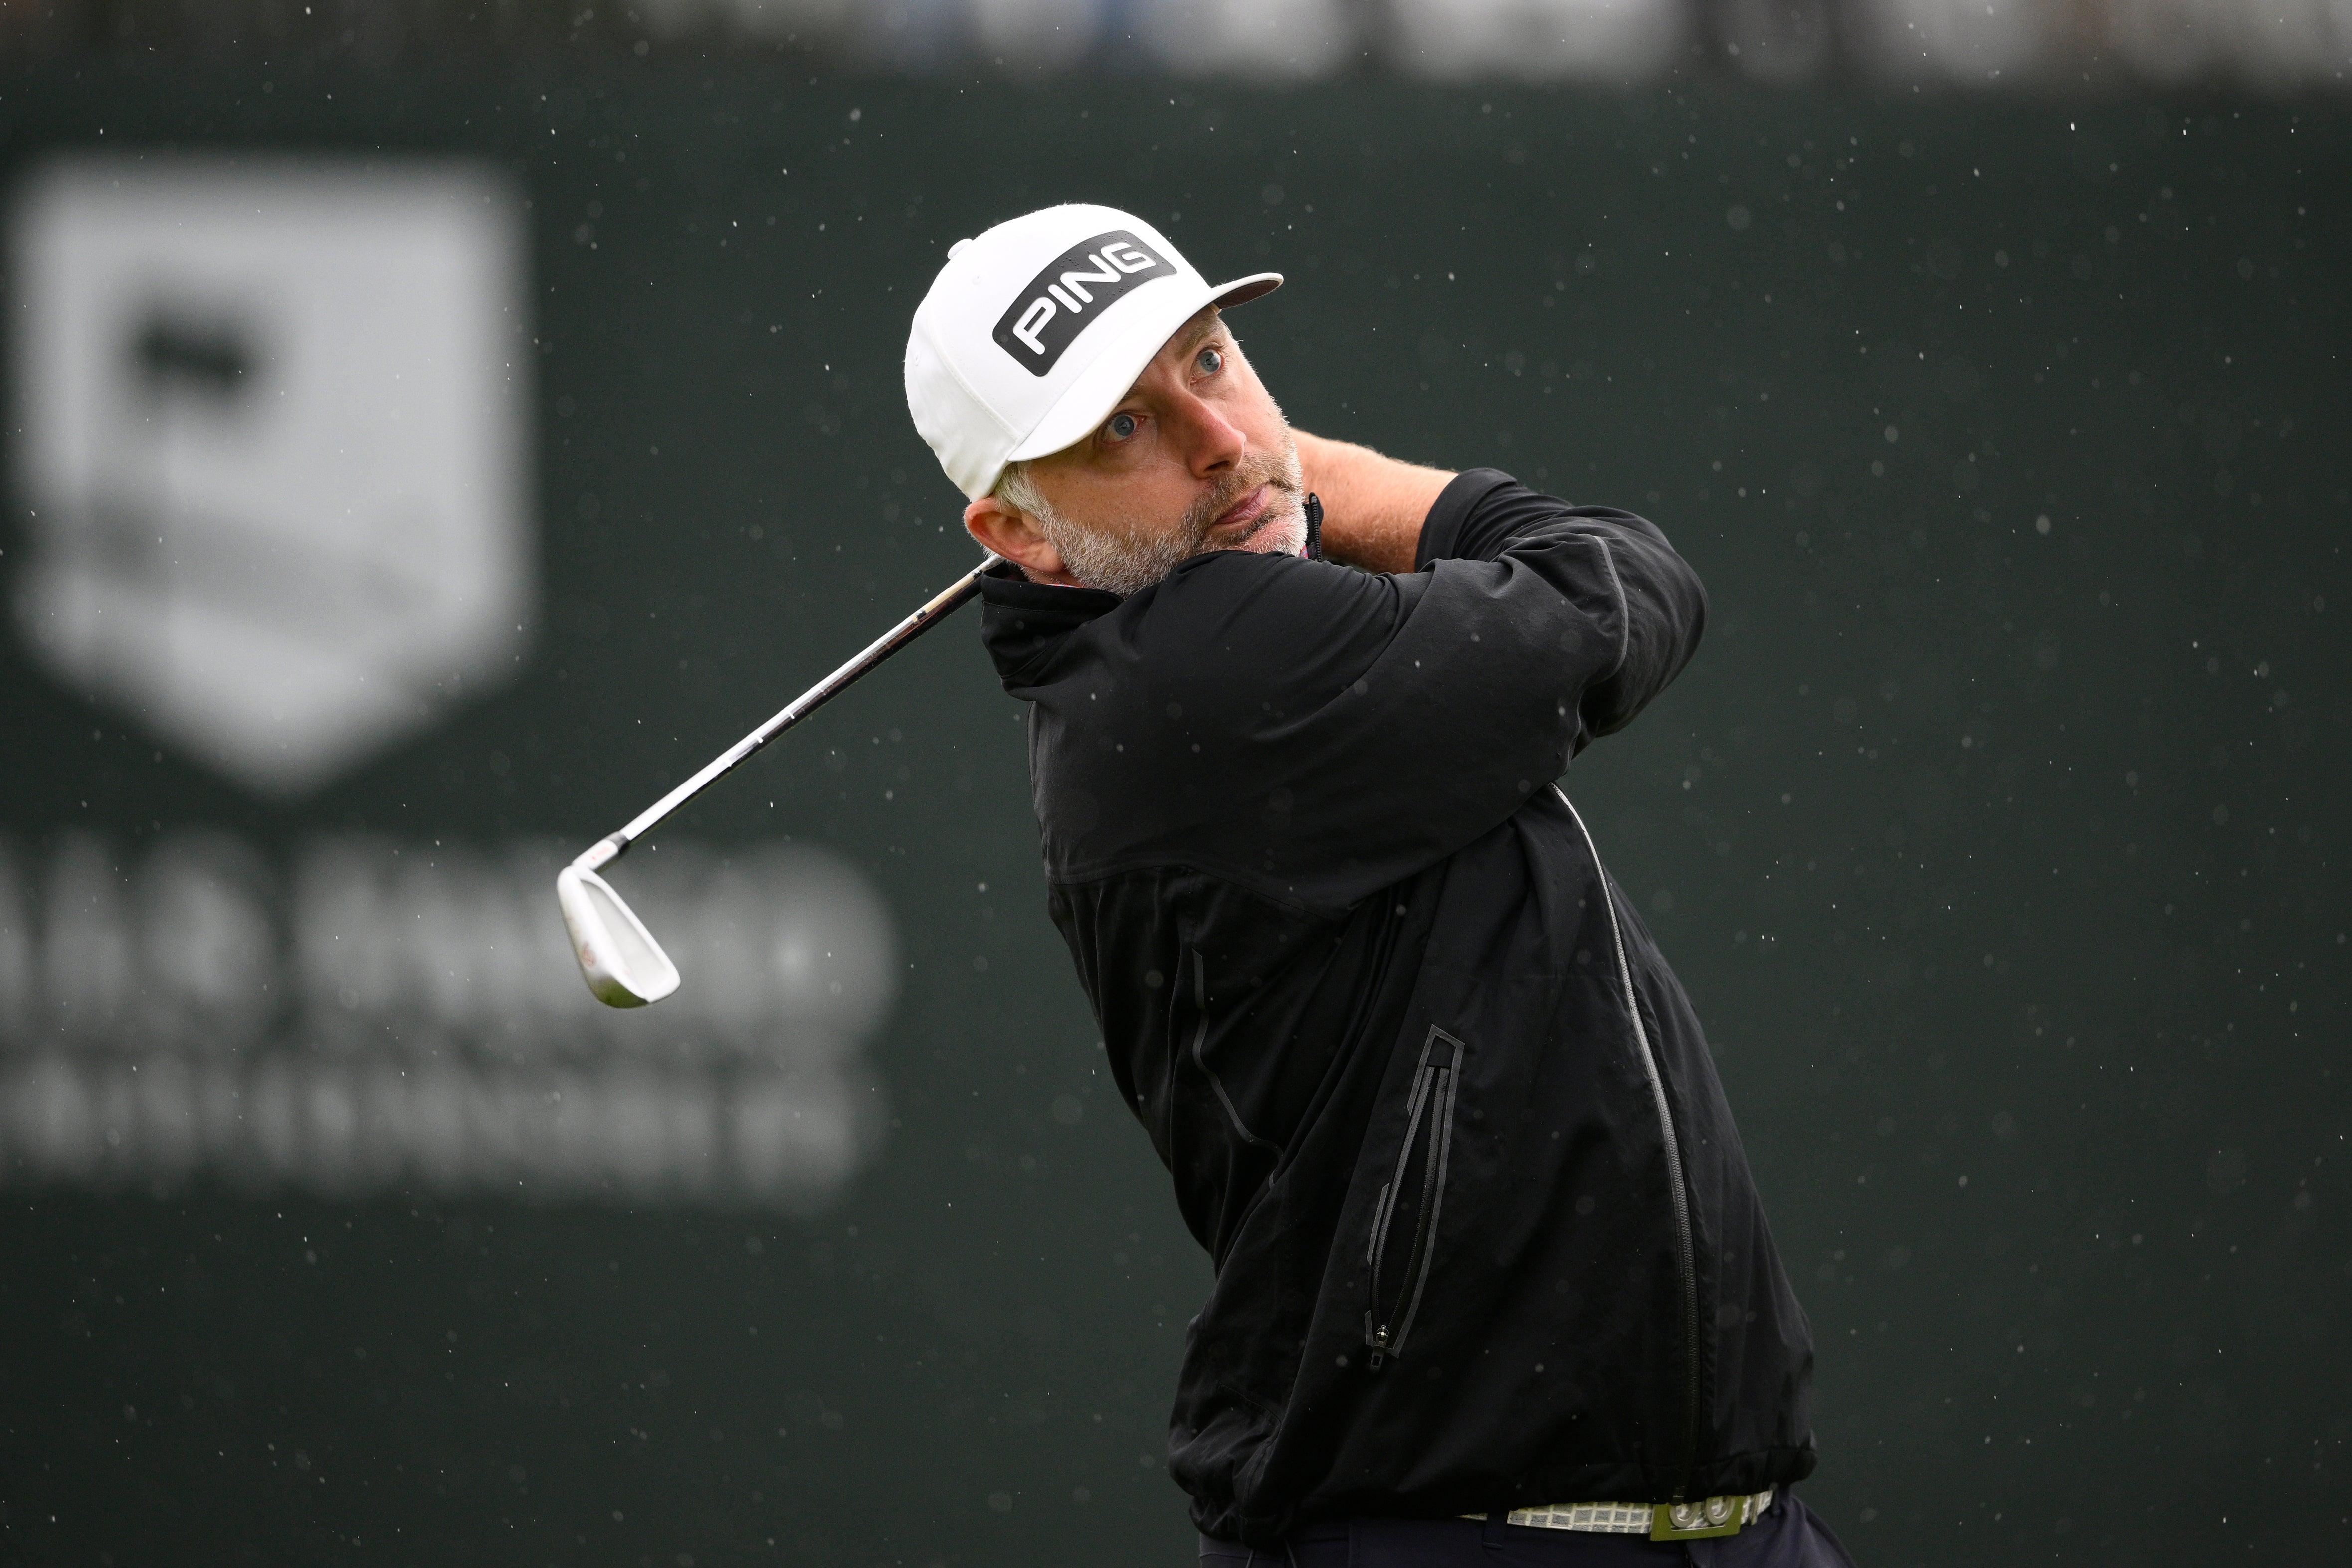 England’s David Skinns claimed a share of the clubhouse lead in the AT&T Byron Nelson in Texas (Nick Wass/AP)